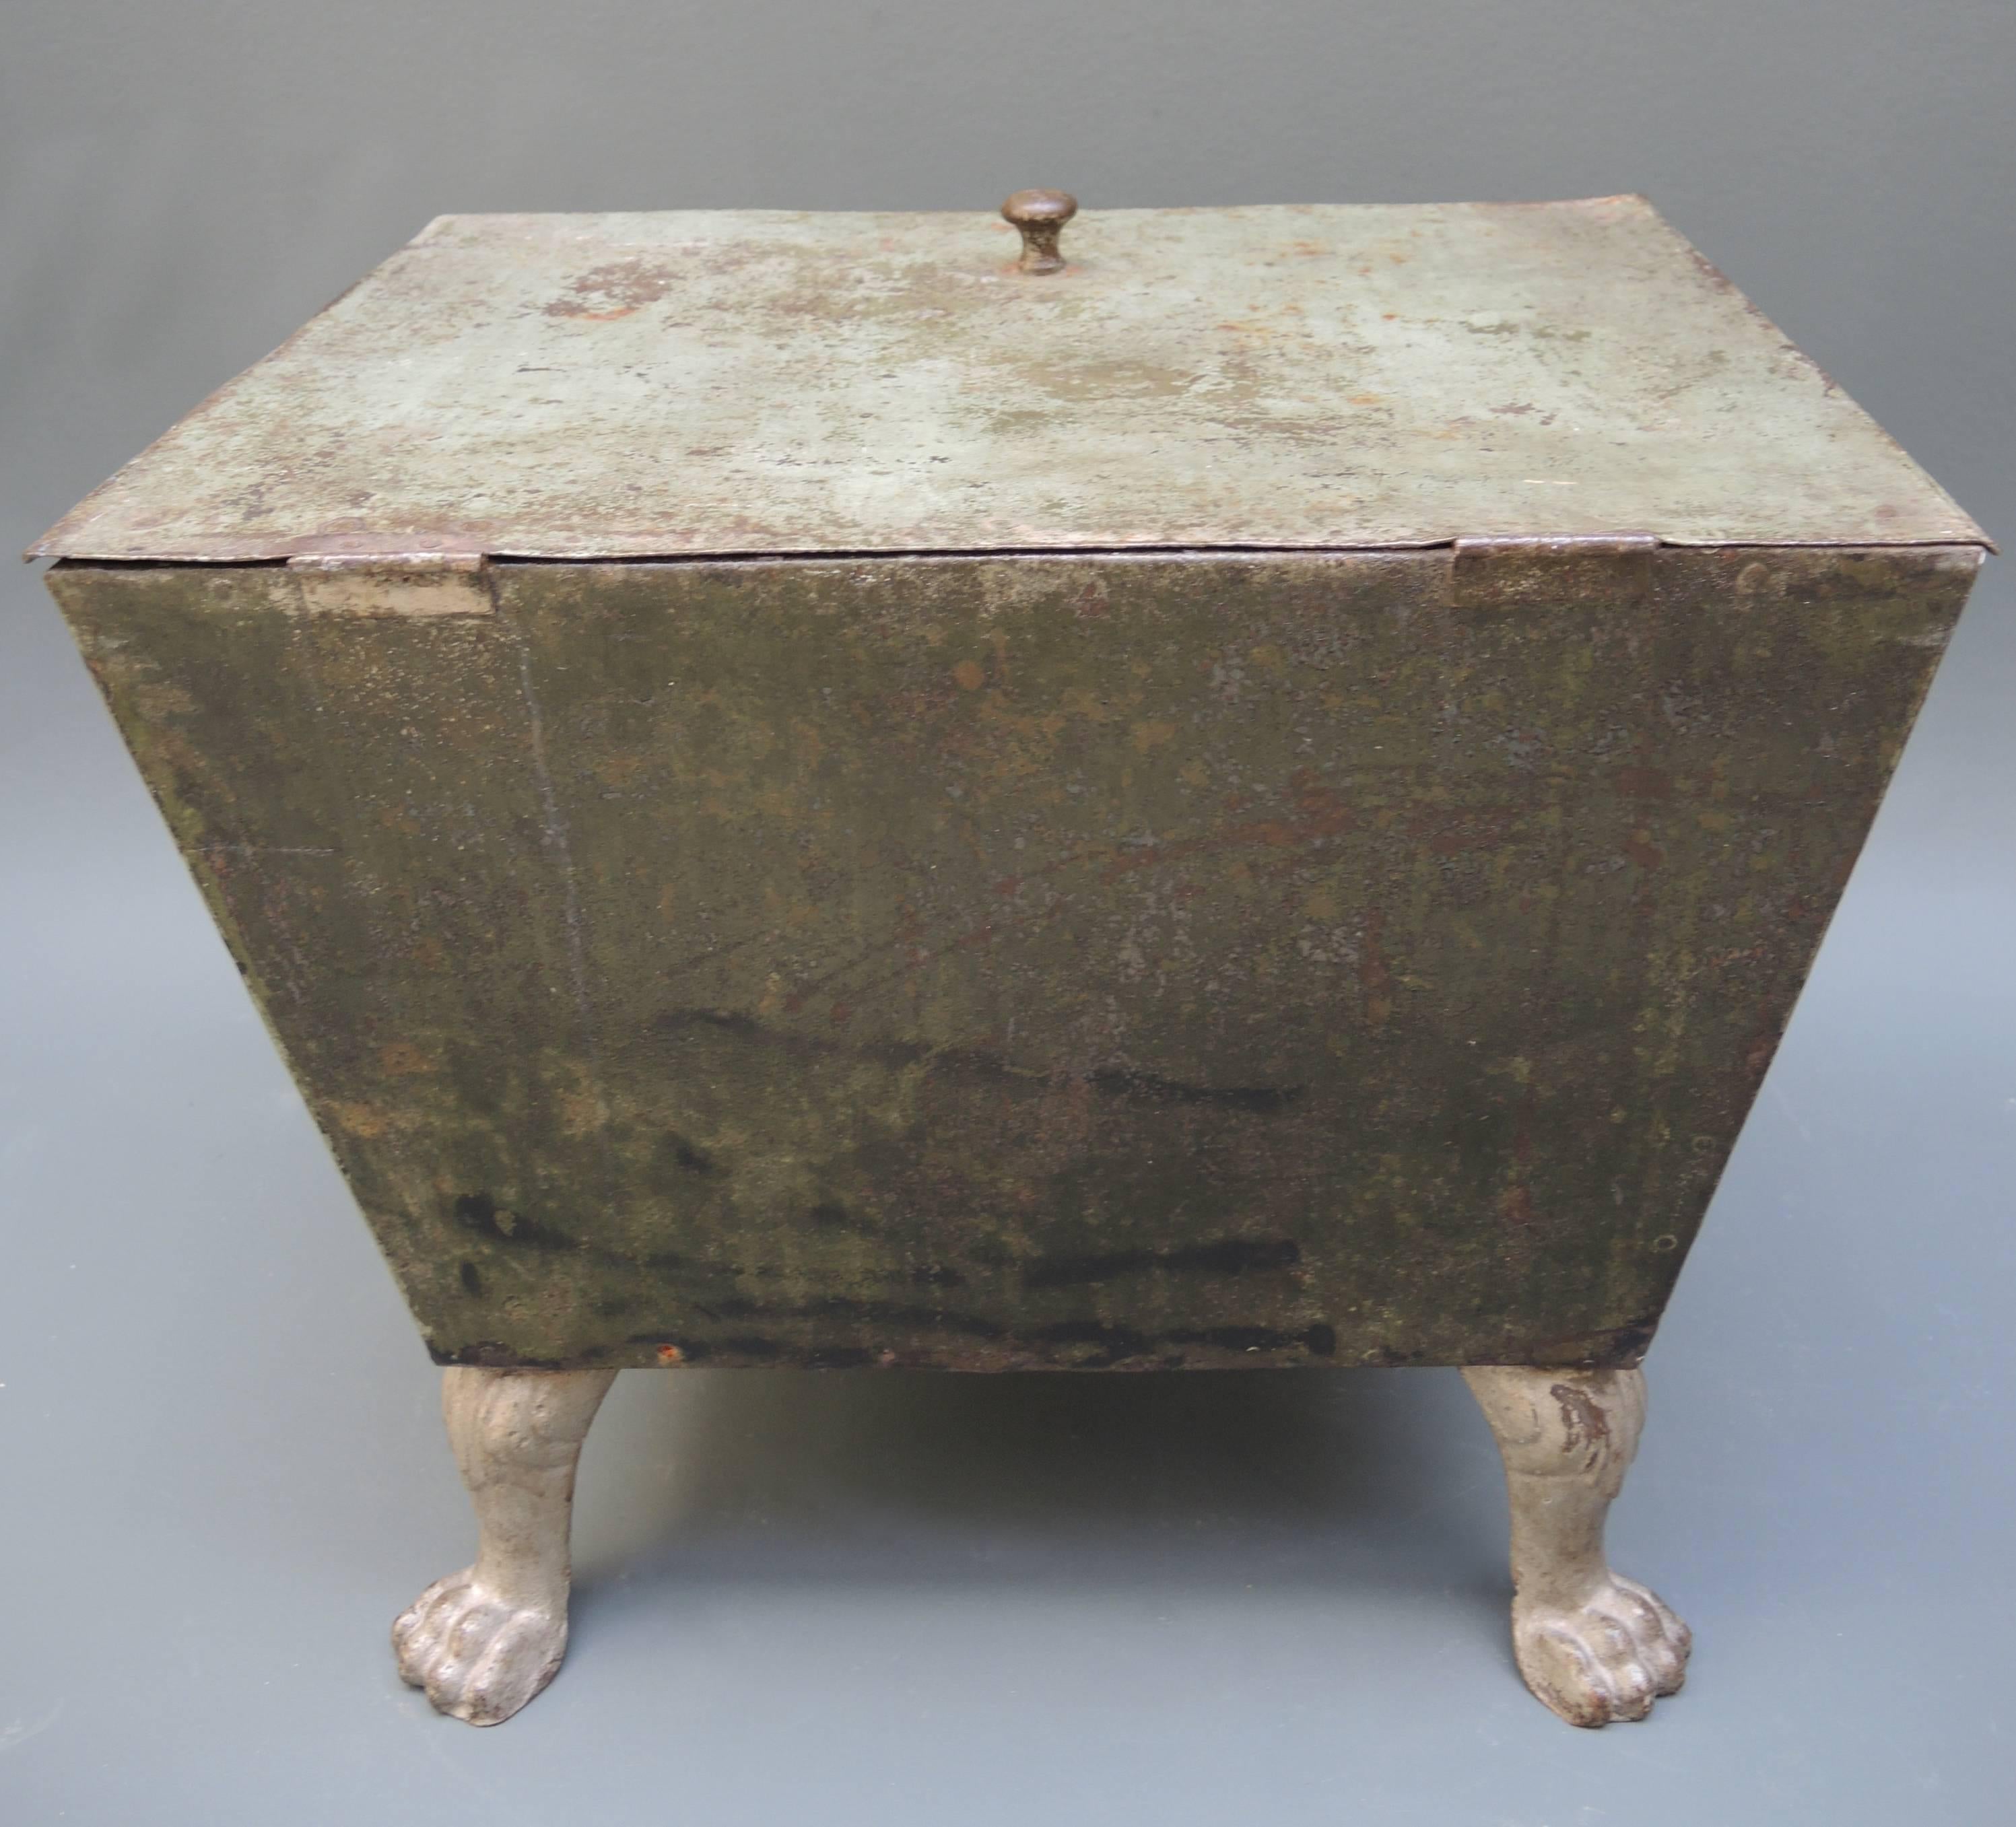 Mid-19th century French iron box with four lion paw feet. Fantastic original mint green and olive paint.
Originally used for firewood or coal, but is also the perfect height to use as a small coffee table.